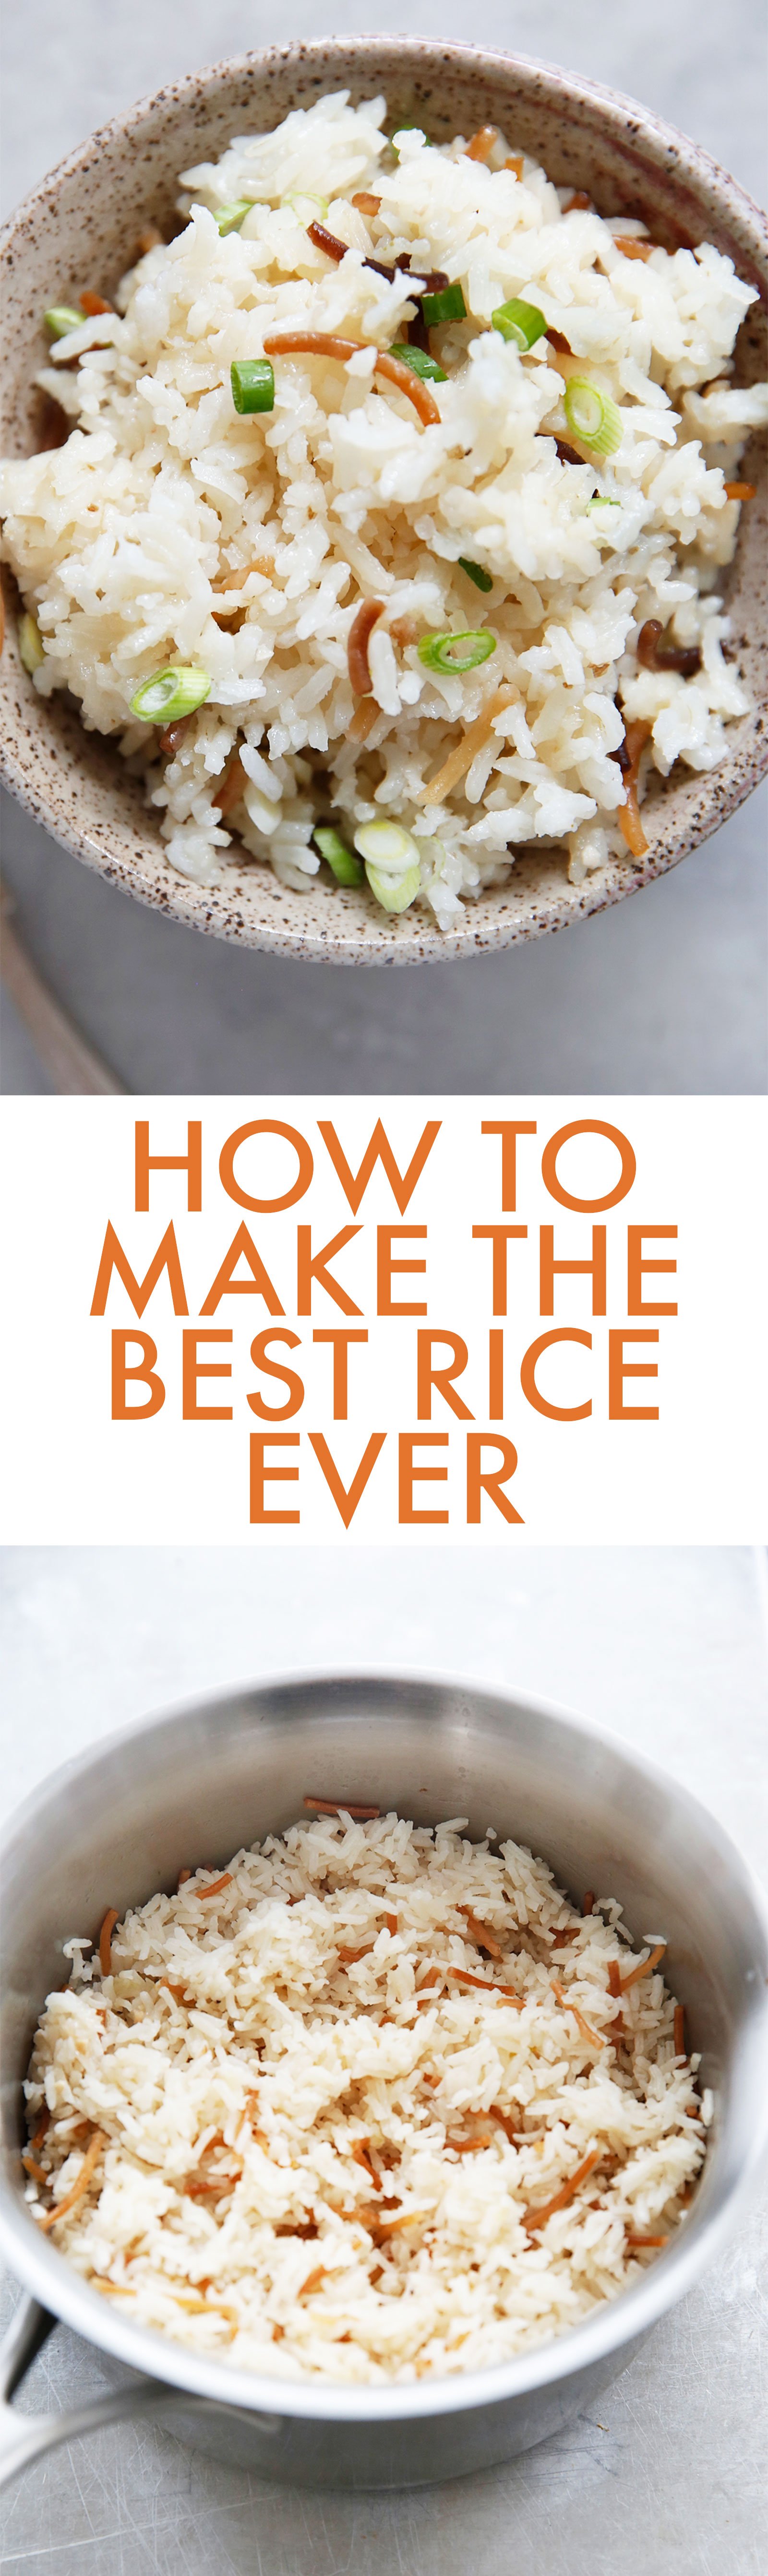 How to Make the Best Rice Ever (Stove Top and Instant Pot) | Lexi's ...